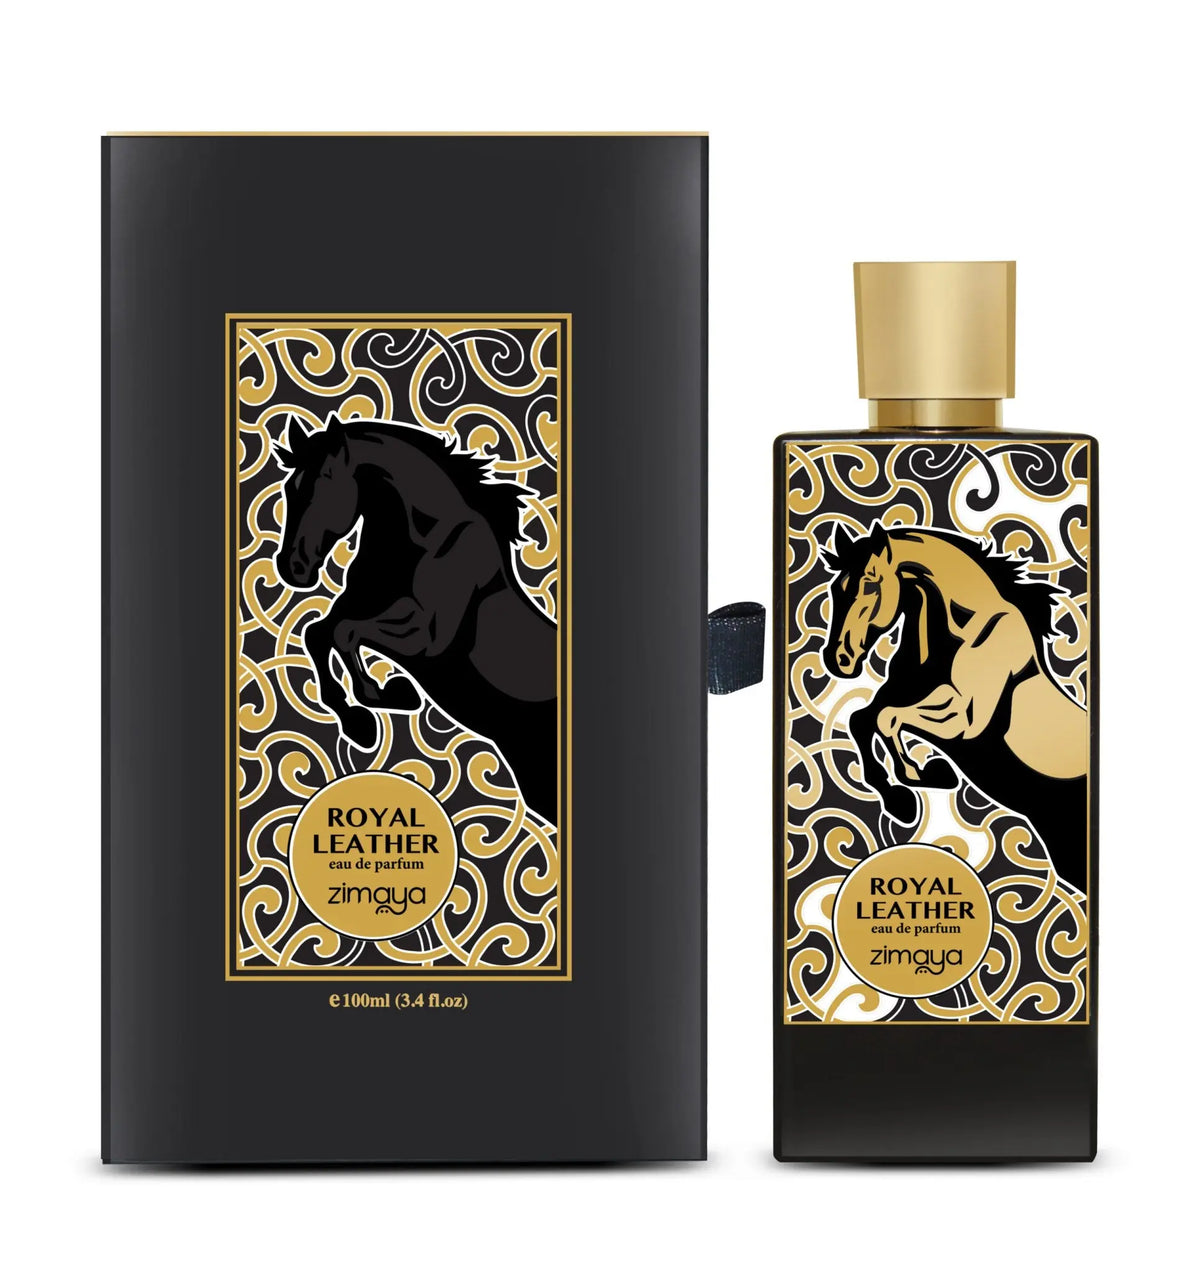 The image displays a set of "Royal Leather" eau de parfum by Zimaya, featuring both the packaging and the bottle. The packaging is a sleek, black box with a prominent window showcasing an artistic silhouette of a horse's head in profile, set against a gold and black intricate pattern background. The bottle mirrors this design with the same horse head silhouette and pattern in gold on a black background. The bottle has a square shape and contains 100ml (3.4 fl.oz) of the fragrance.